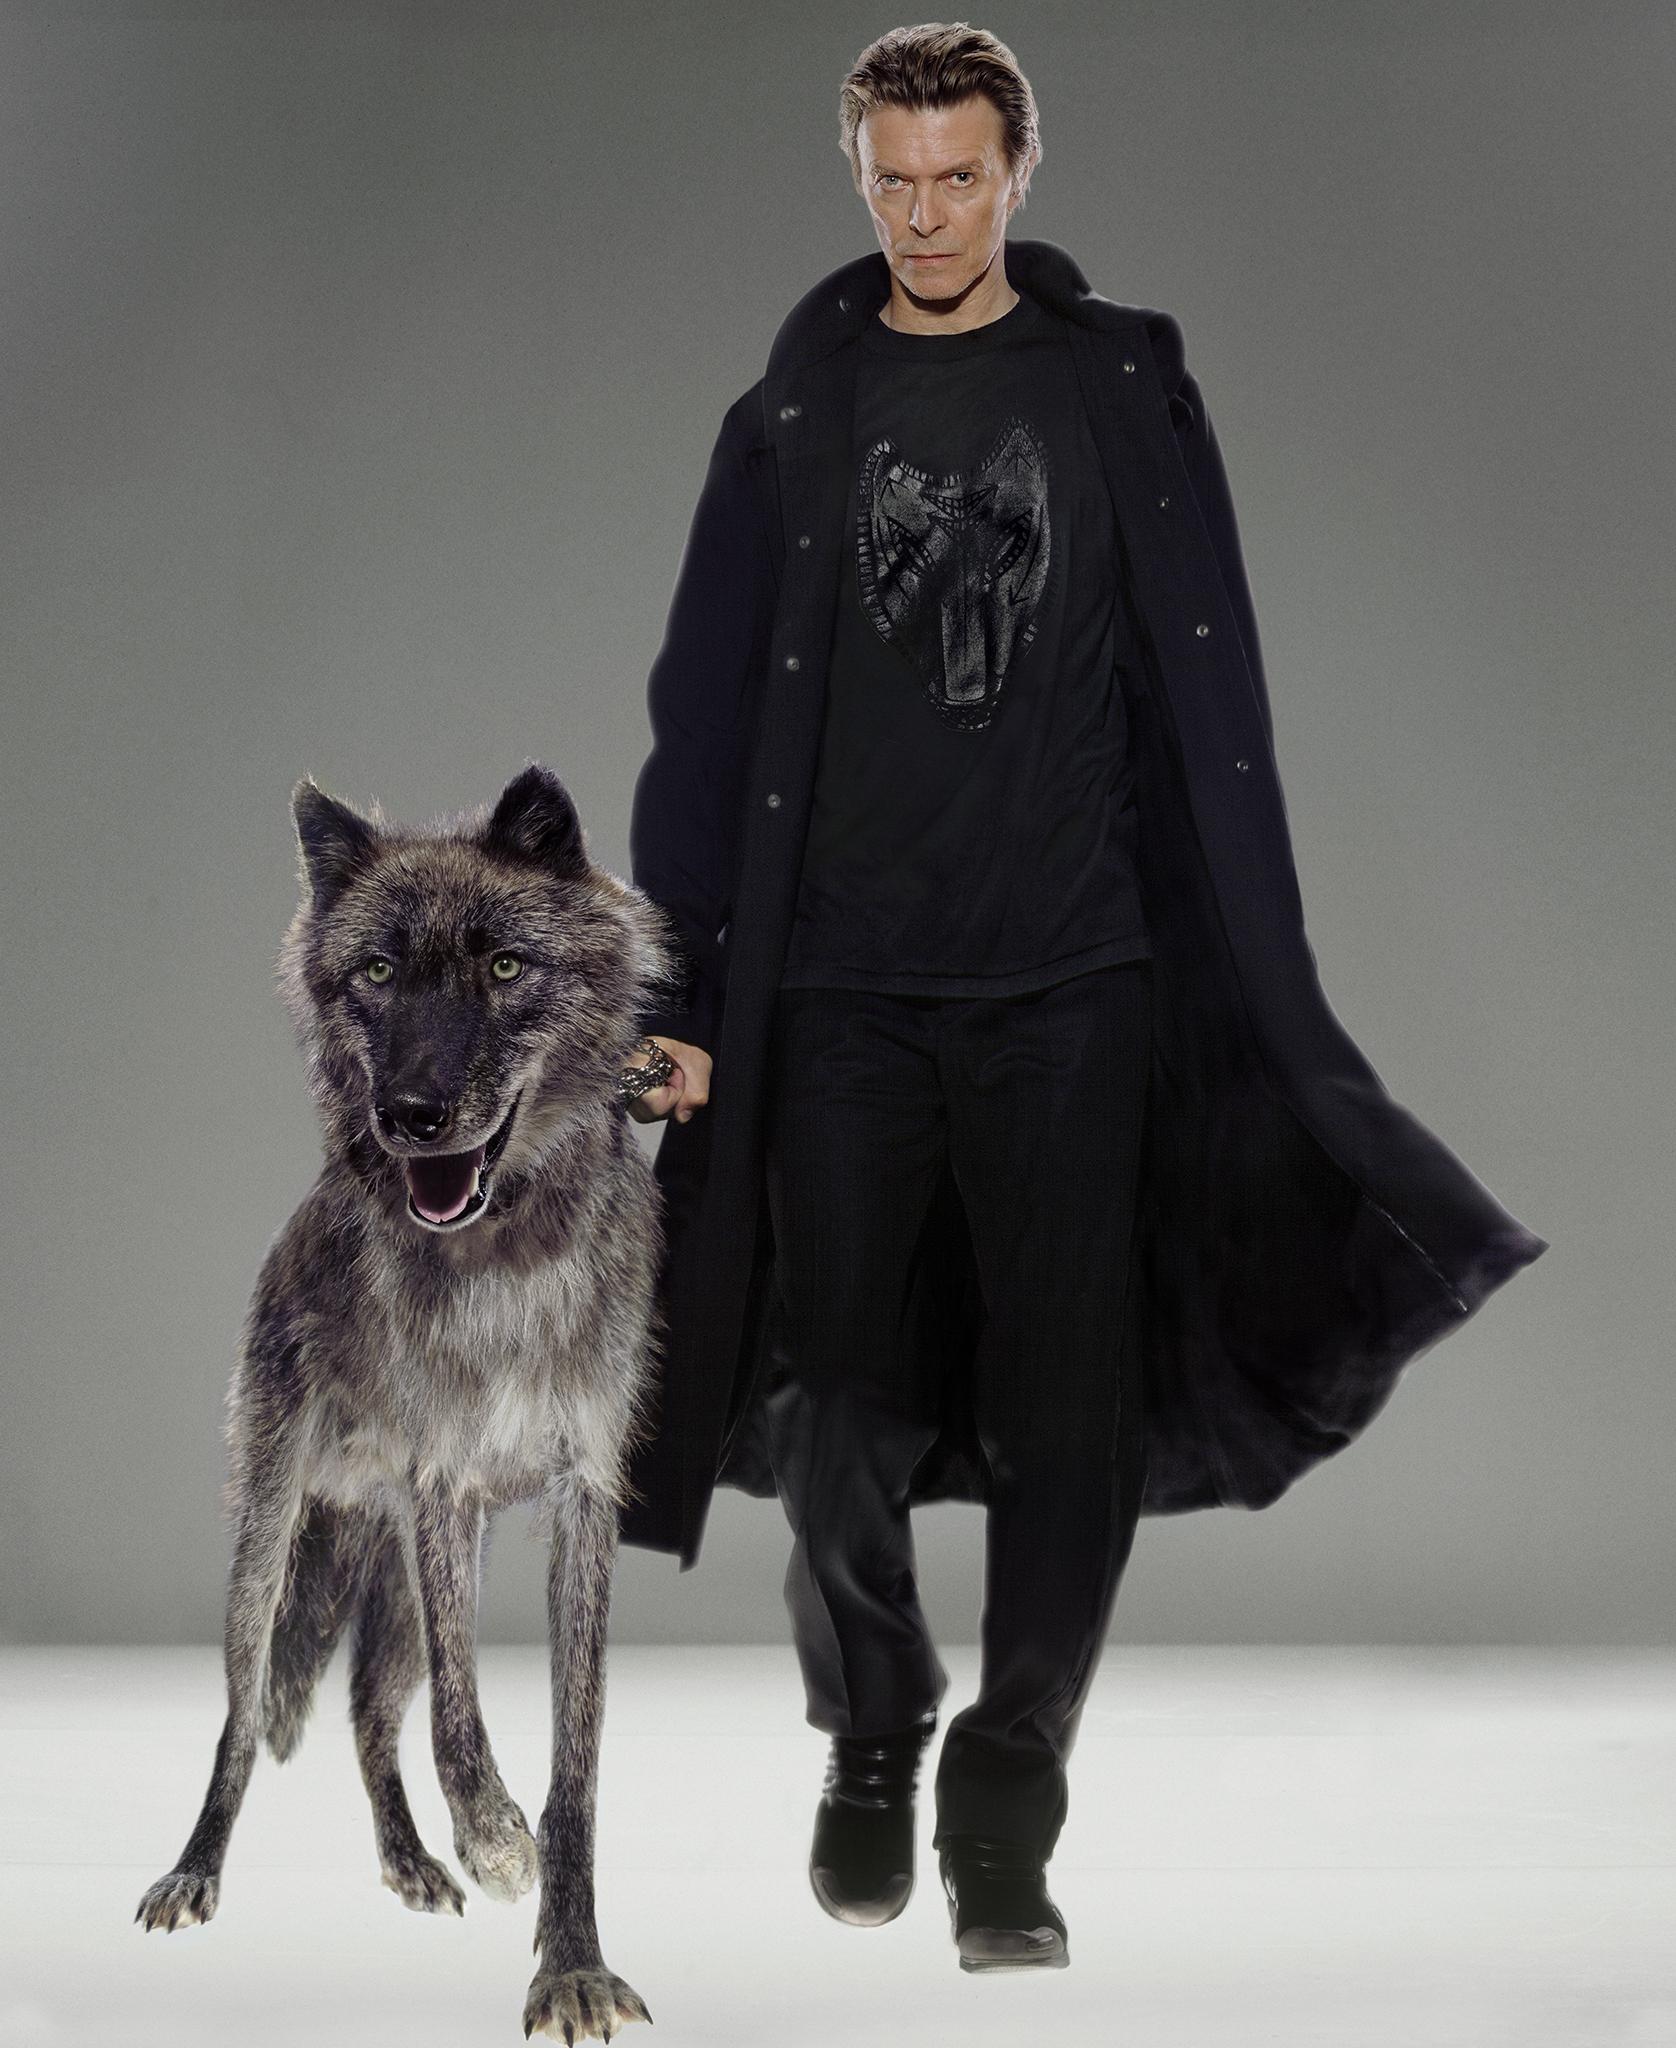 Markus Klinko Figurative Photograph - Natural Villains - superstar David Bowie in black clothing with wolf